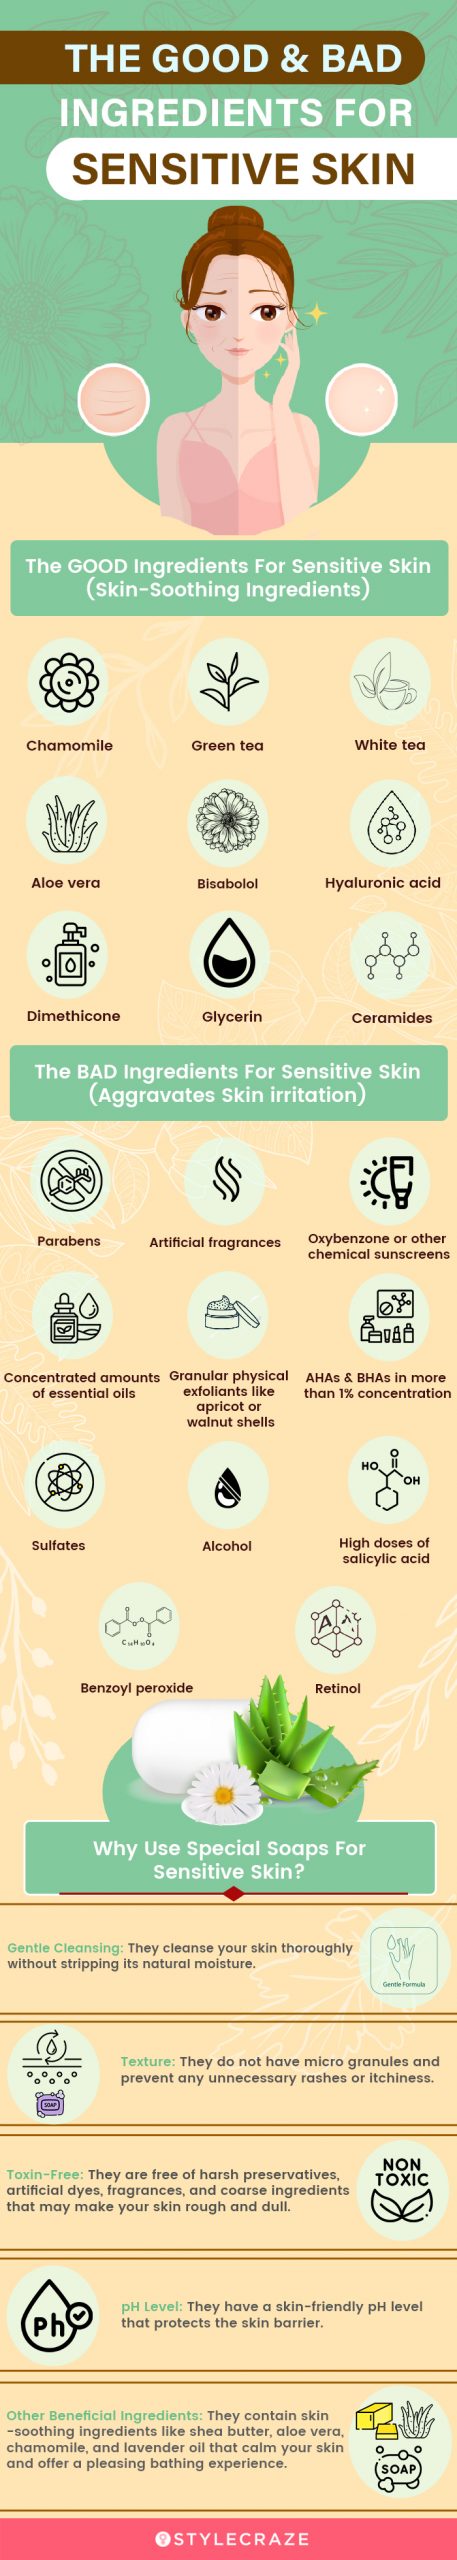 The Good & Bad Ingredients For Sensitive Skin [infographic]